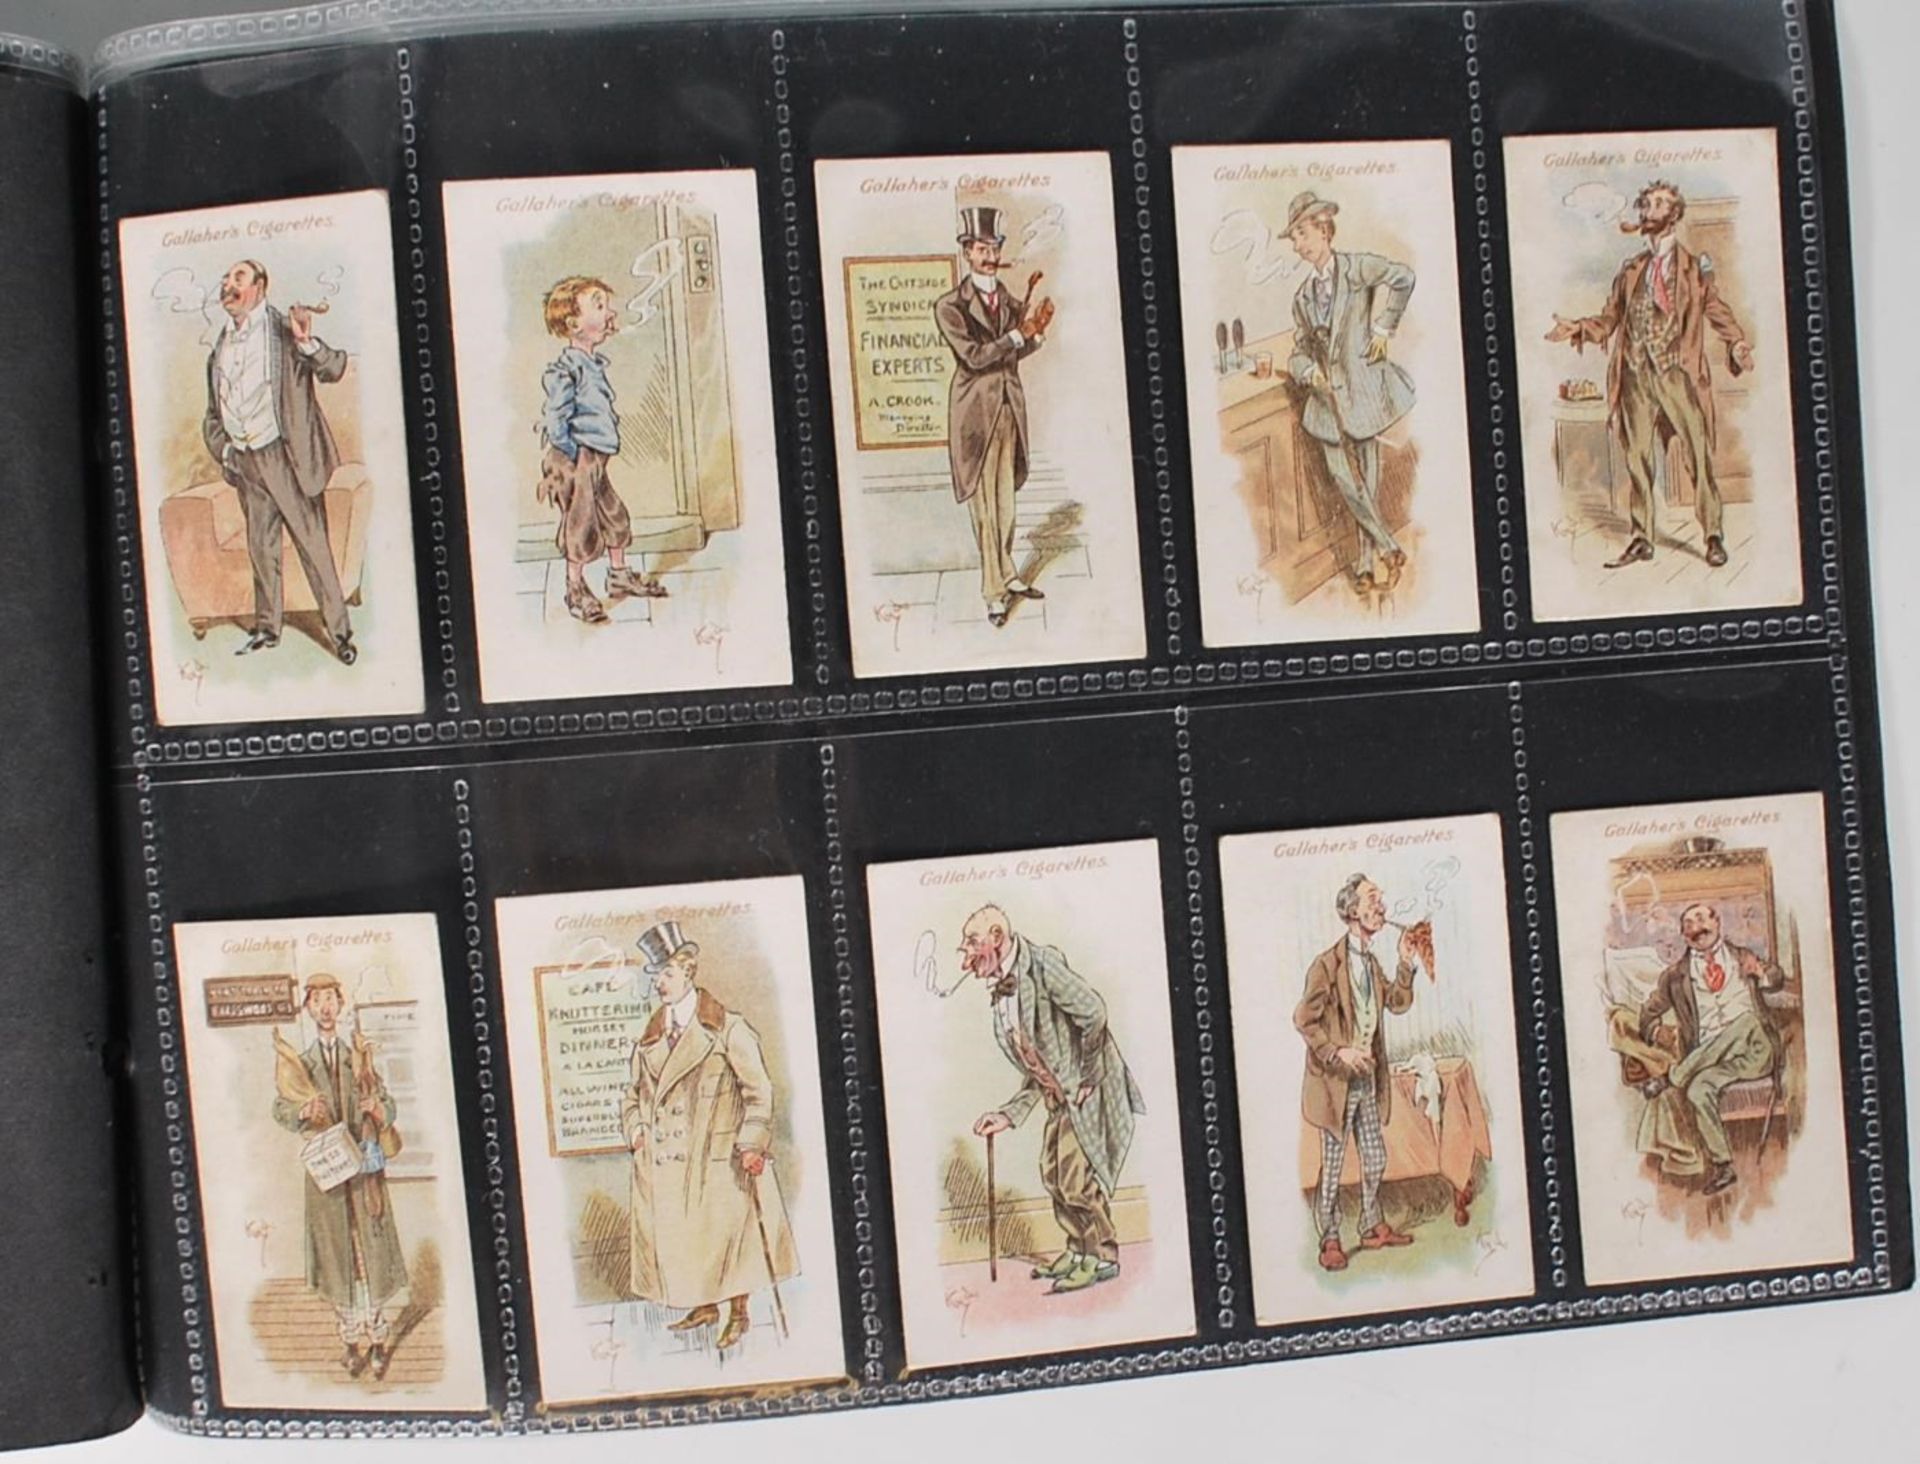 A full set of vintage Gallaher Cigarette trade cards, Votaries Of The Weed Series, complete set of - Image 4 of 5